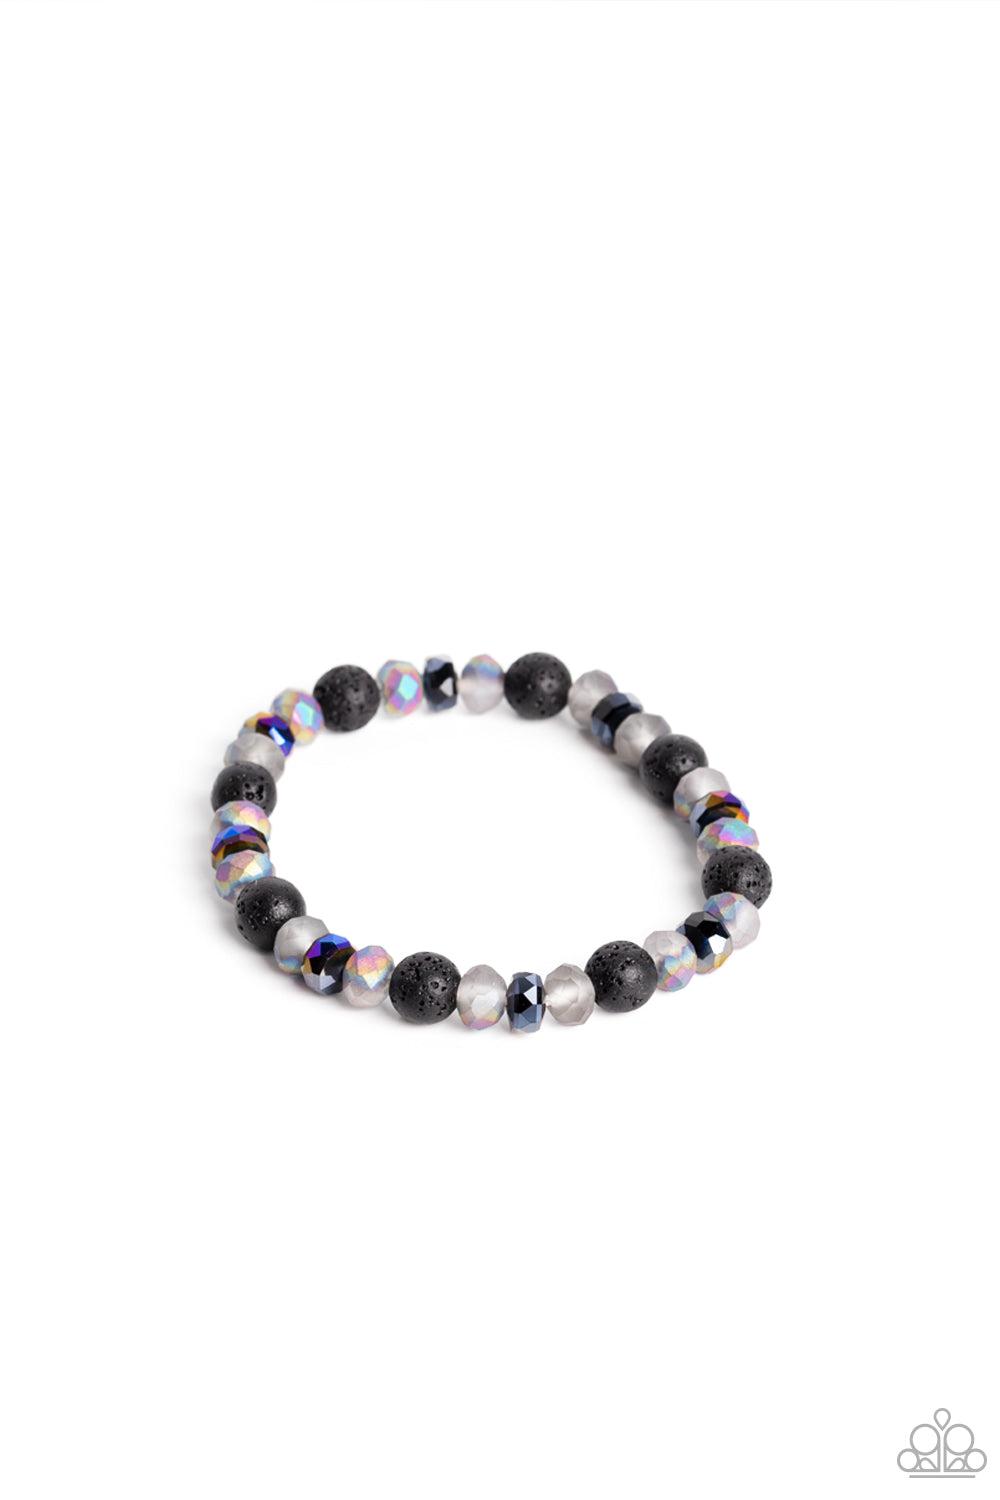 Endless LAVA Multi Oil Spill and Lava Stone Bracelet - Paparazzi Accessories- lightbox - CarasShop.com - $5 Jewelry by Cara Jewels